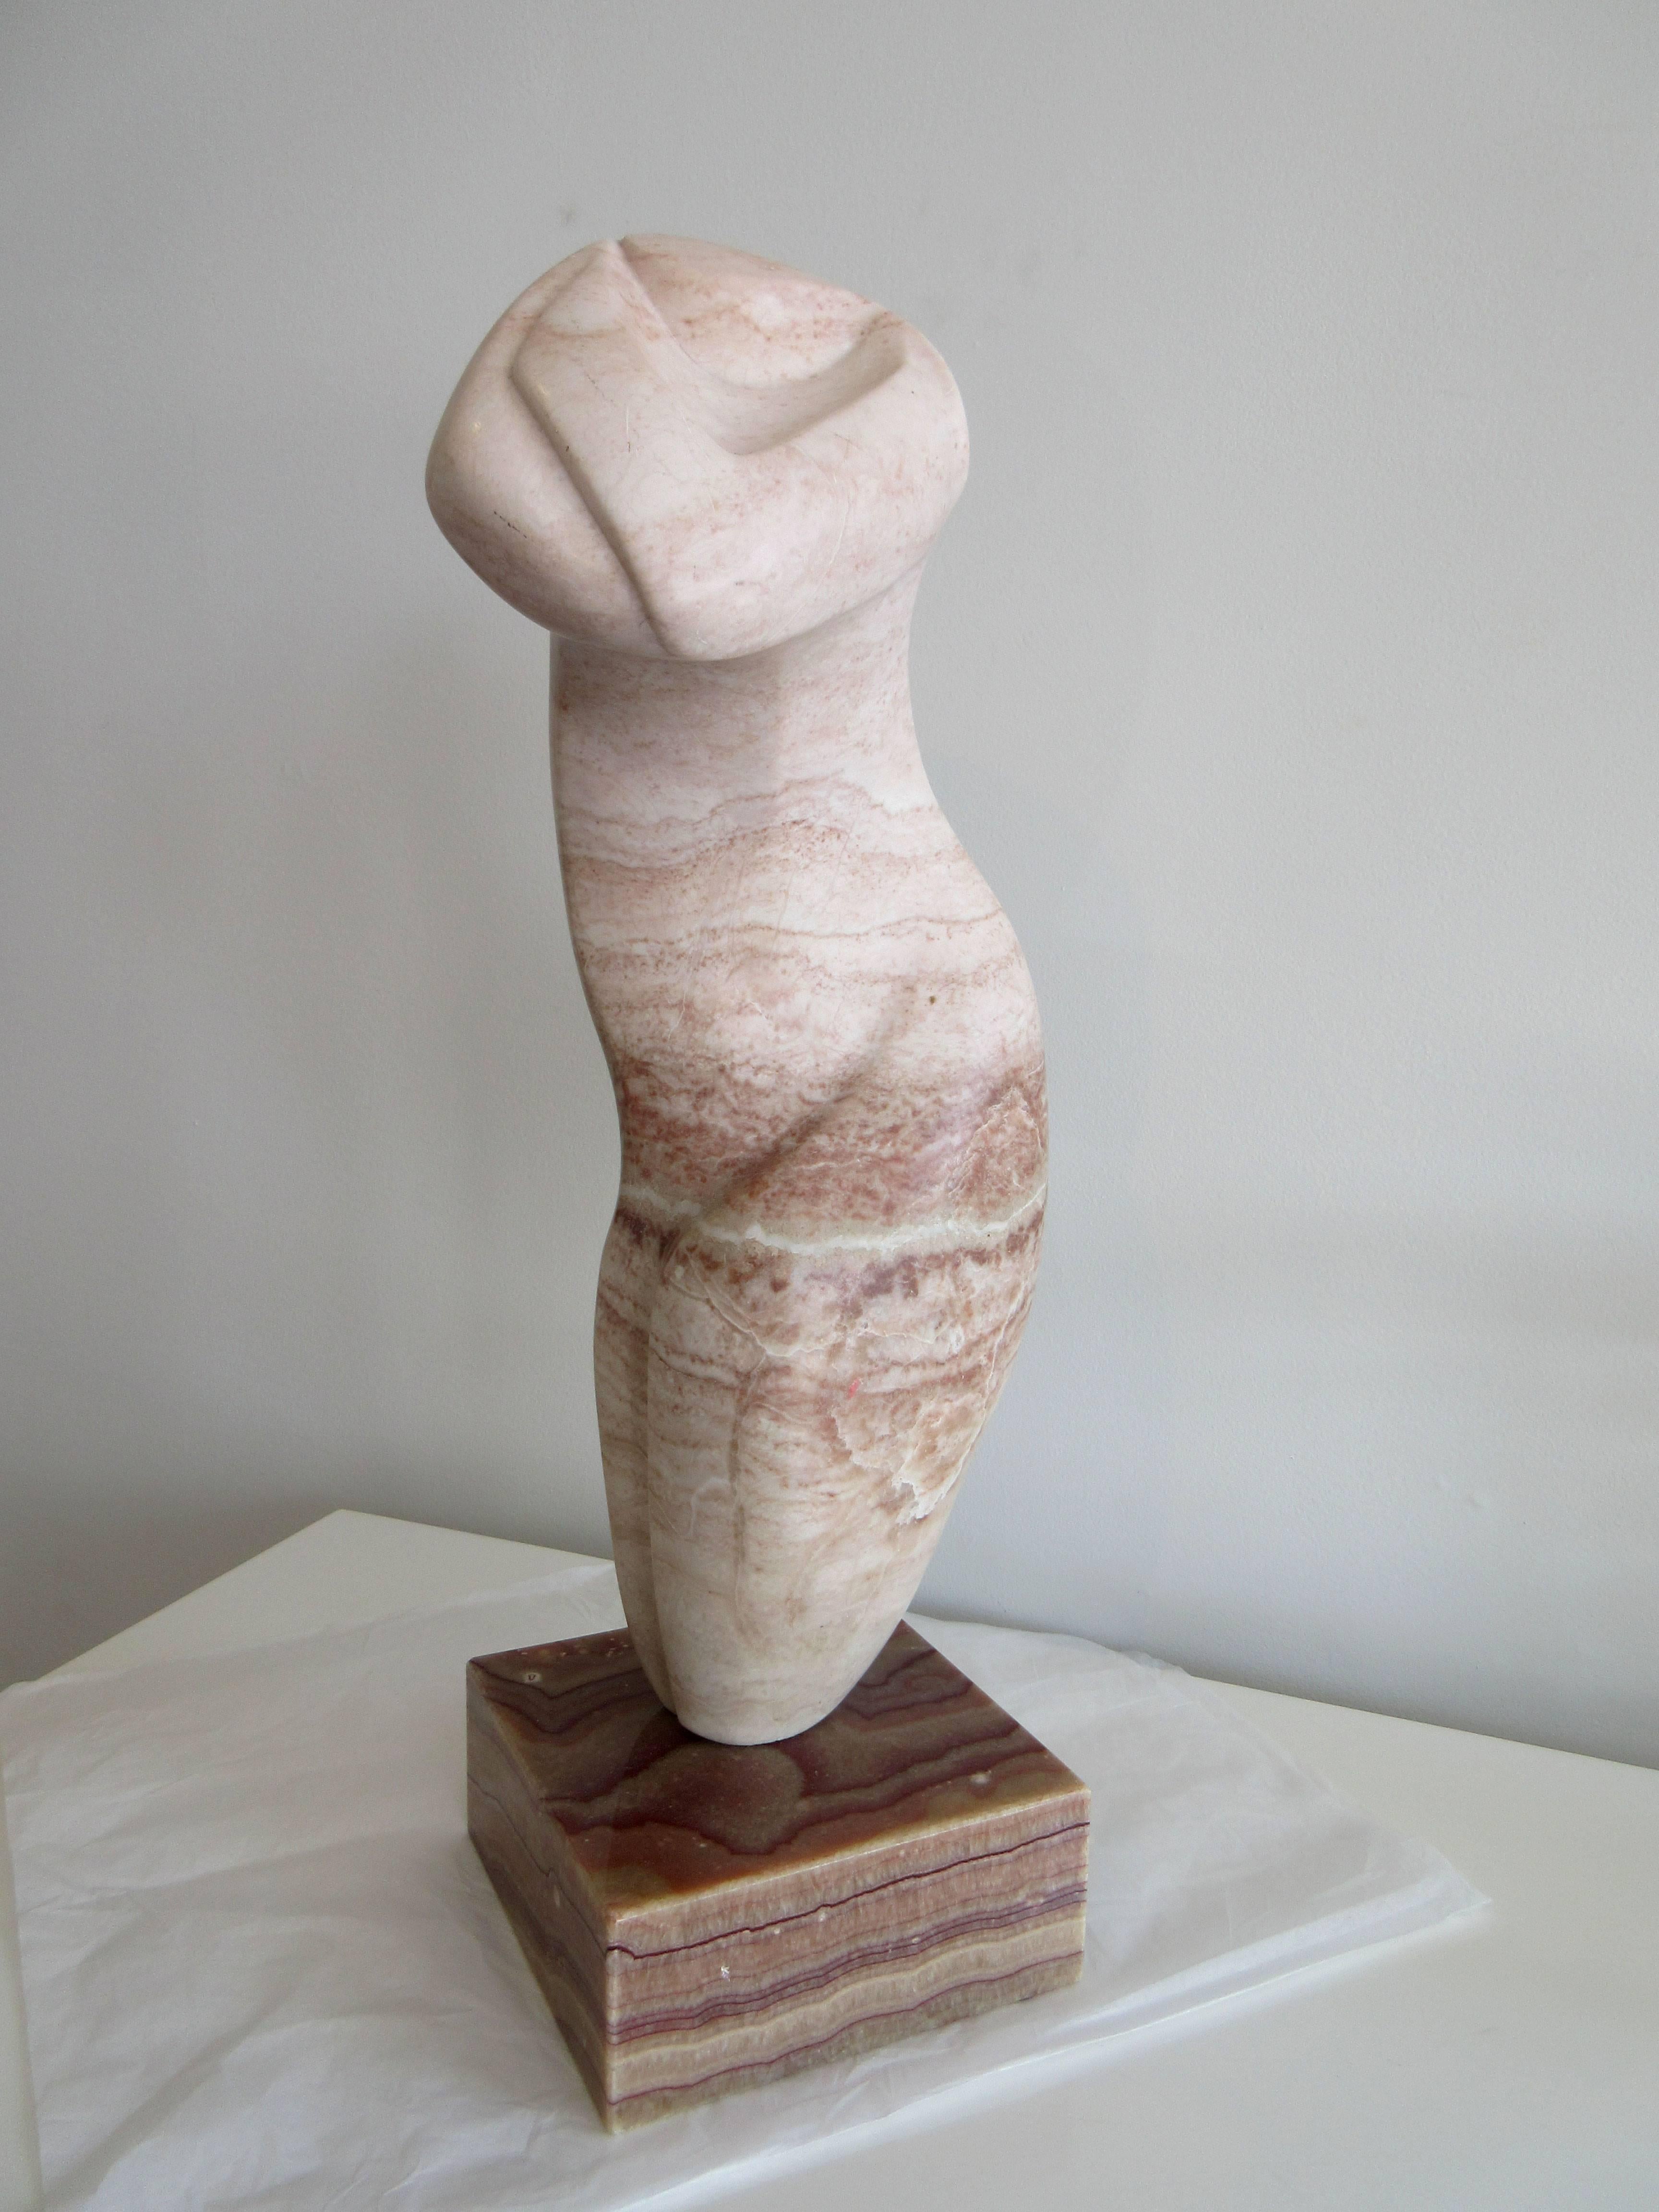 Biomorphic marble sculpture of a caressing figure, illegibly signed.